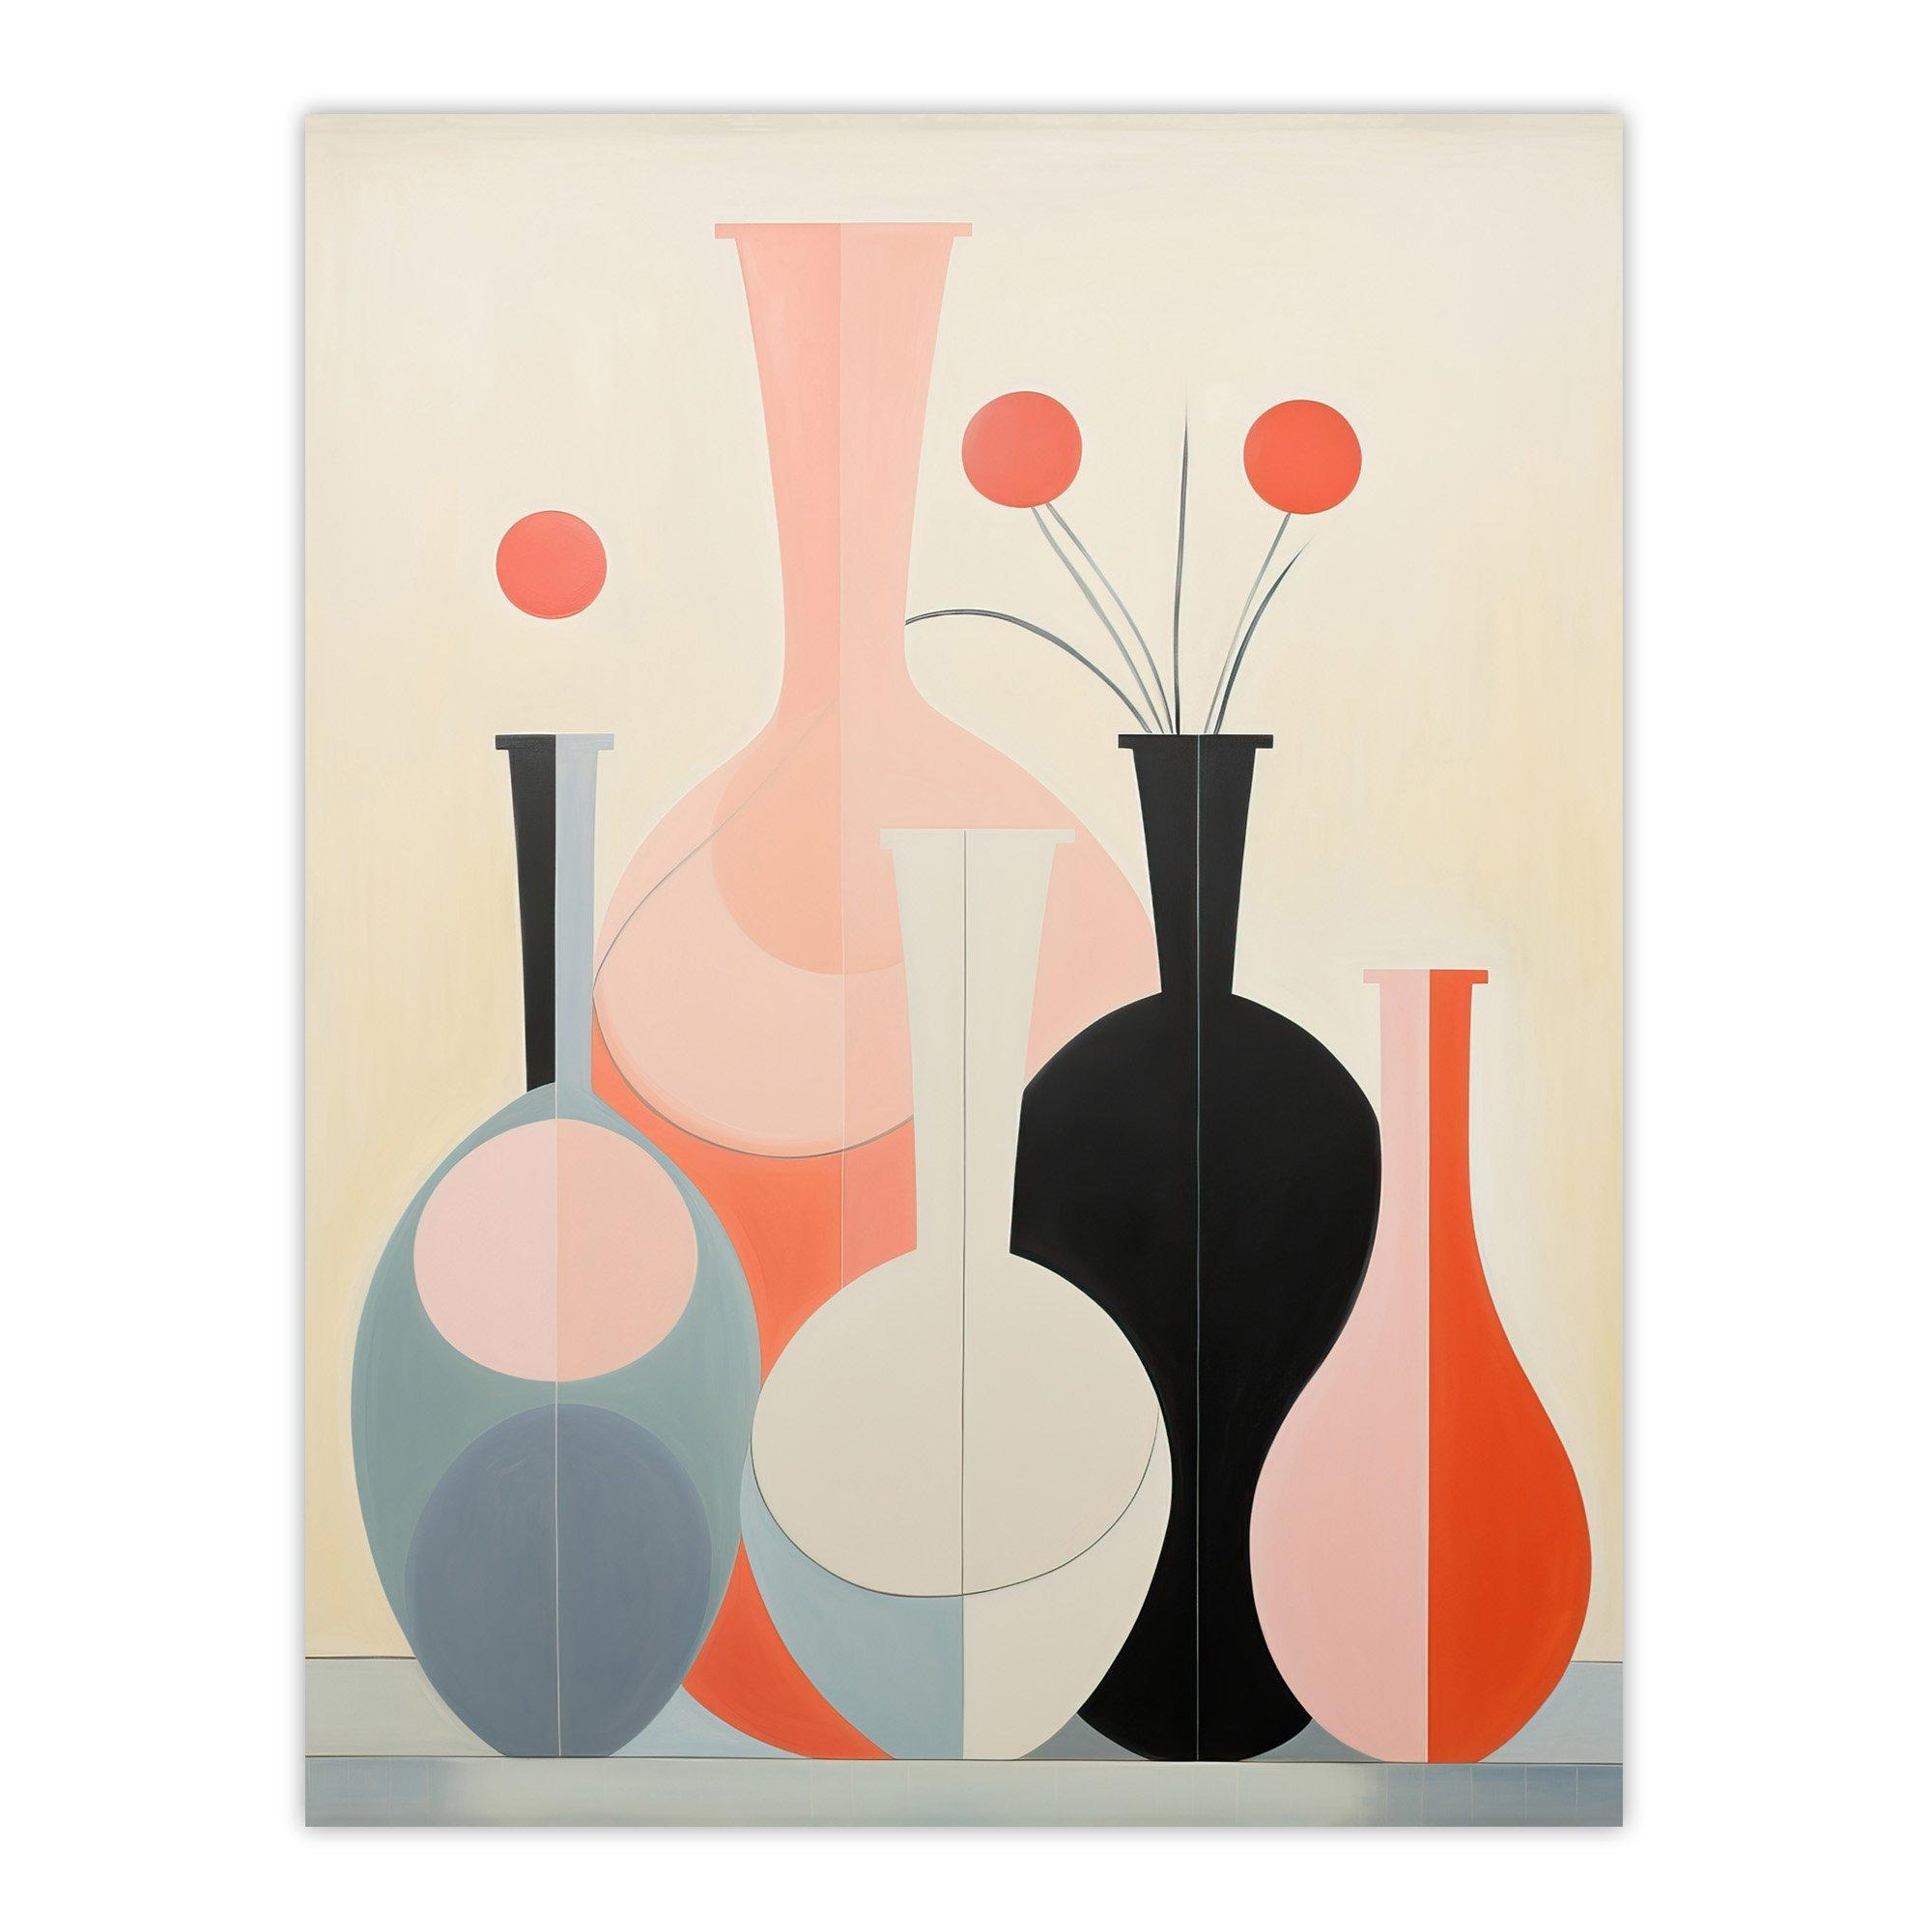 Shadow Vase Symmetry Coral Pink Stone Blue Pastel Colour Oil Painting Unframed Wall Art Print Poster Home Decor Premium - image 1